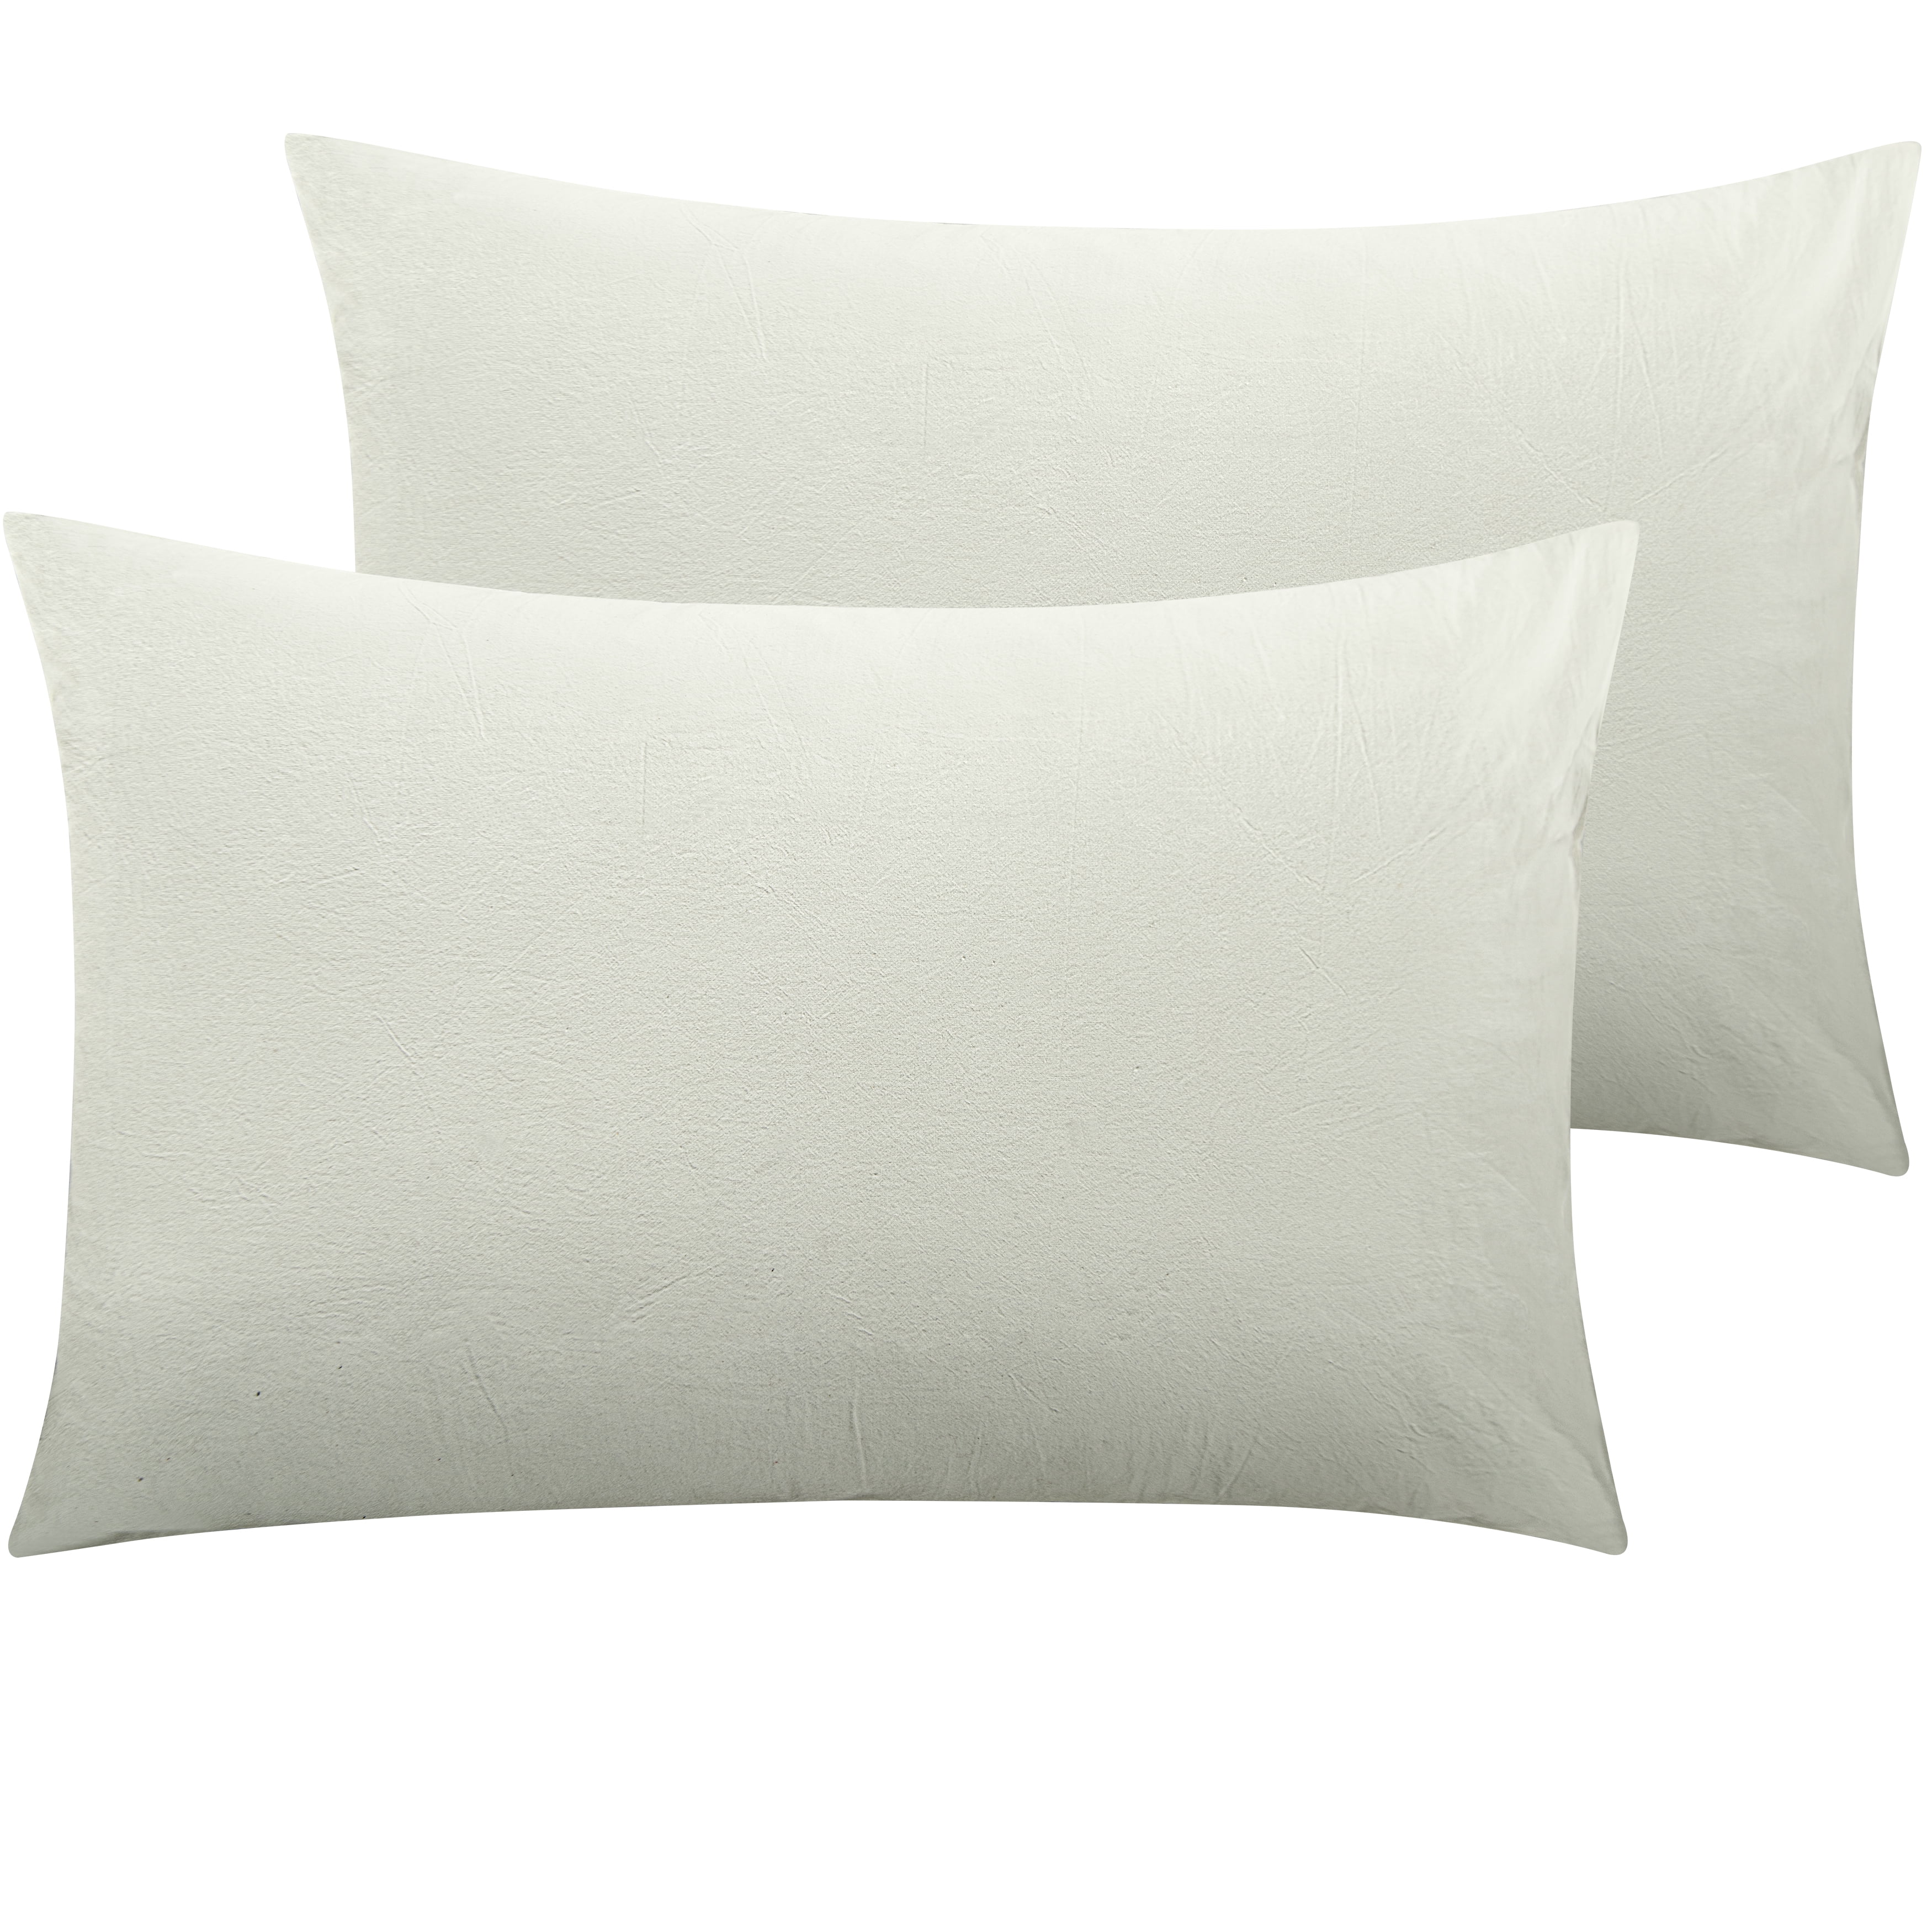 20" x 30" Queen Breathable NTBAY 100% Stone Washed Cotton Pillowcases Set of 2